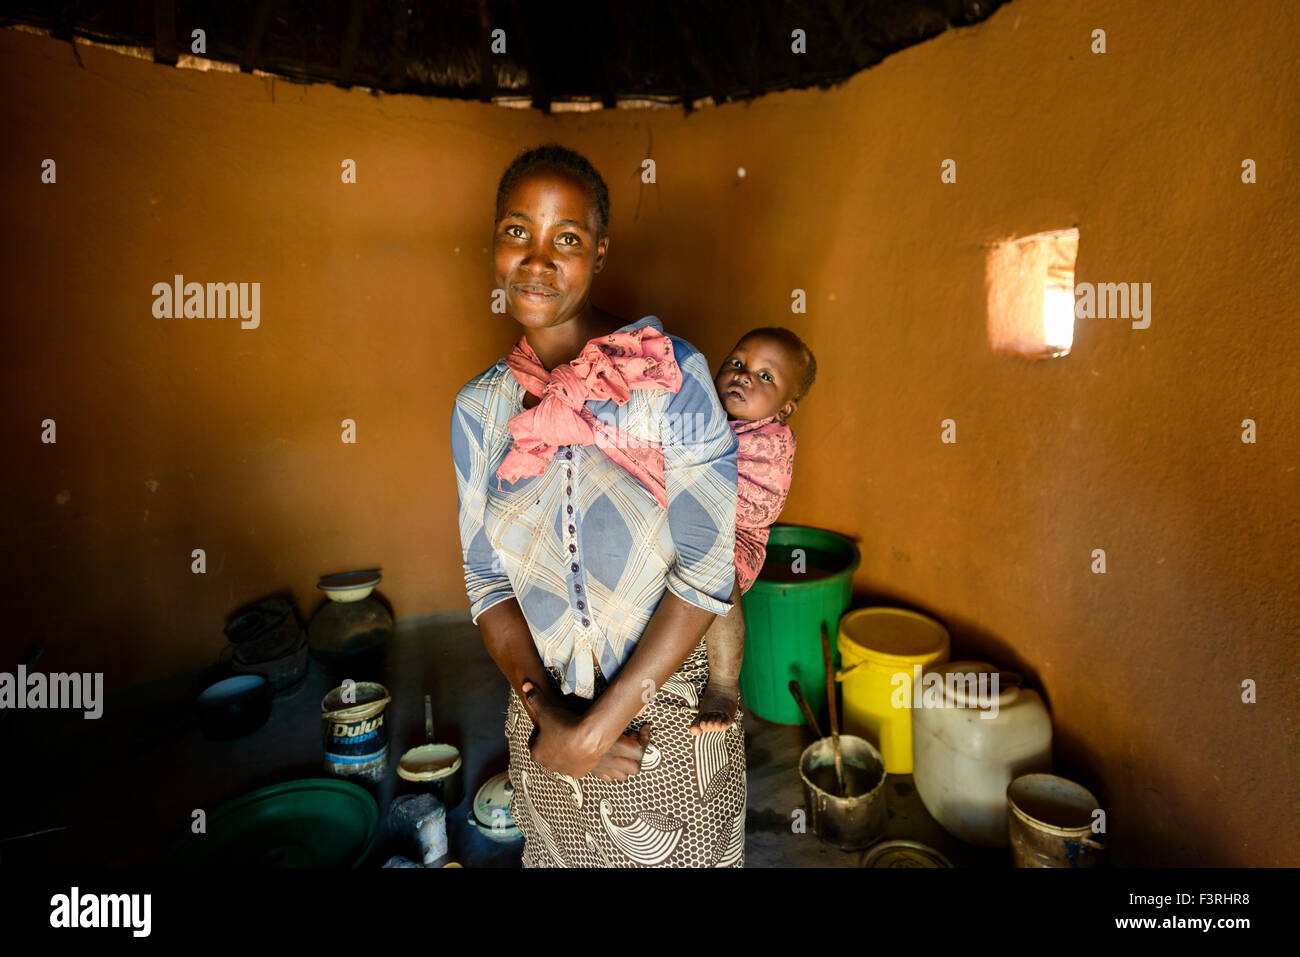 Woman with baby in traditional dwelling, Zambia, Africa Stock Photo